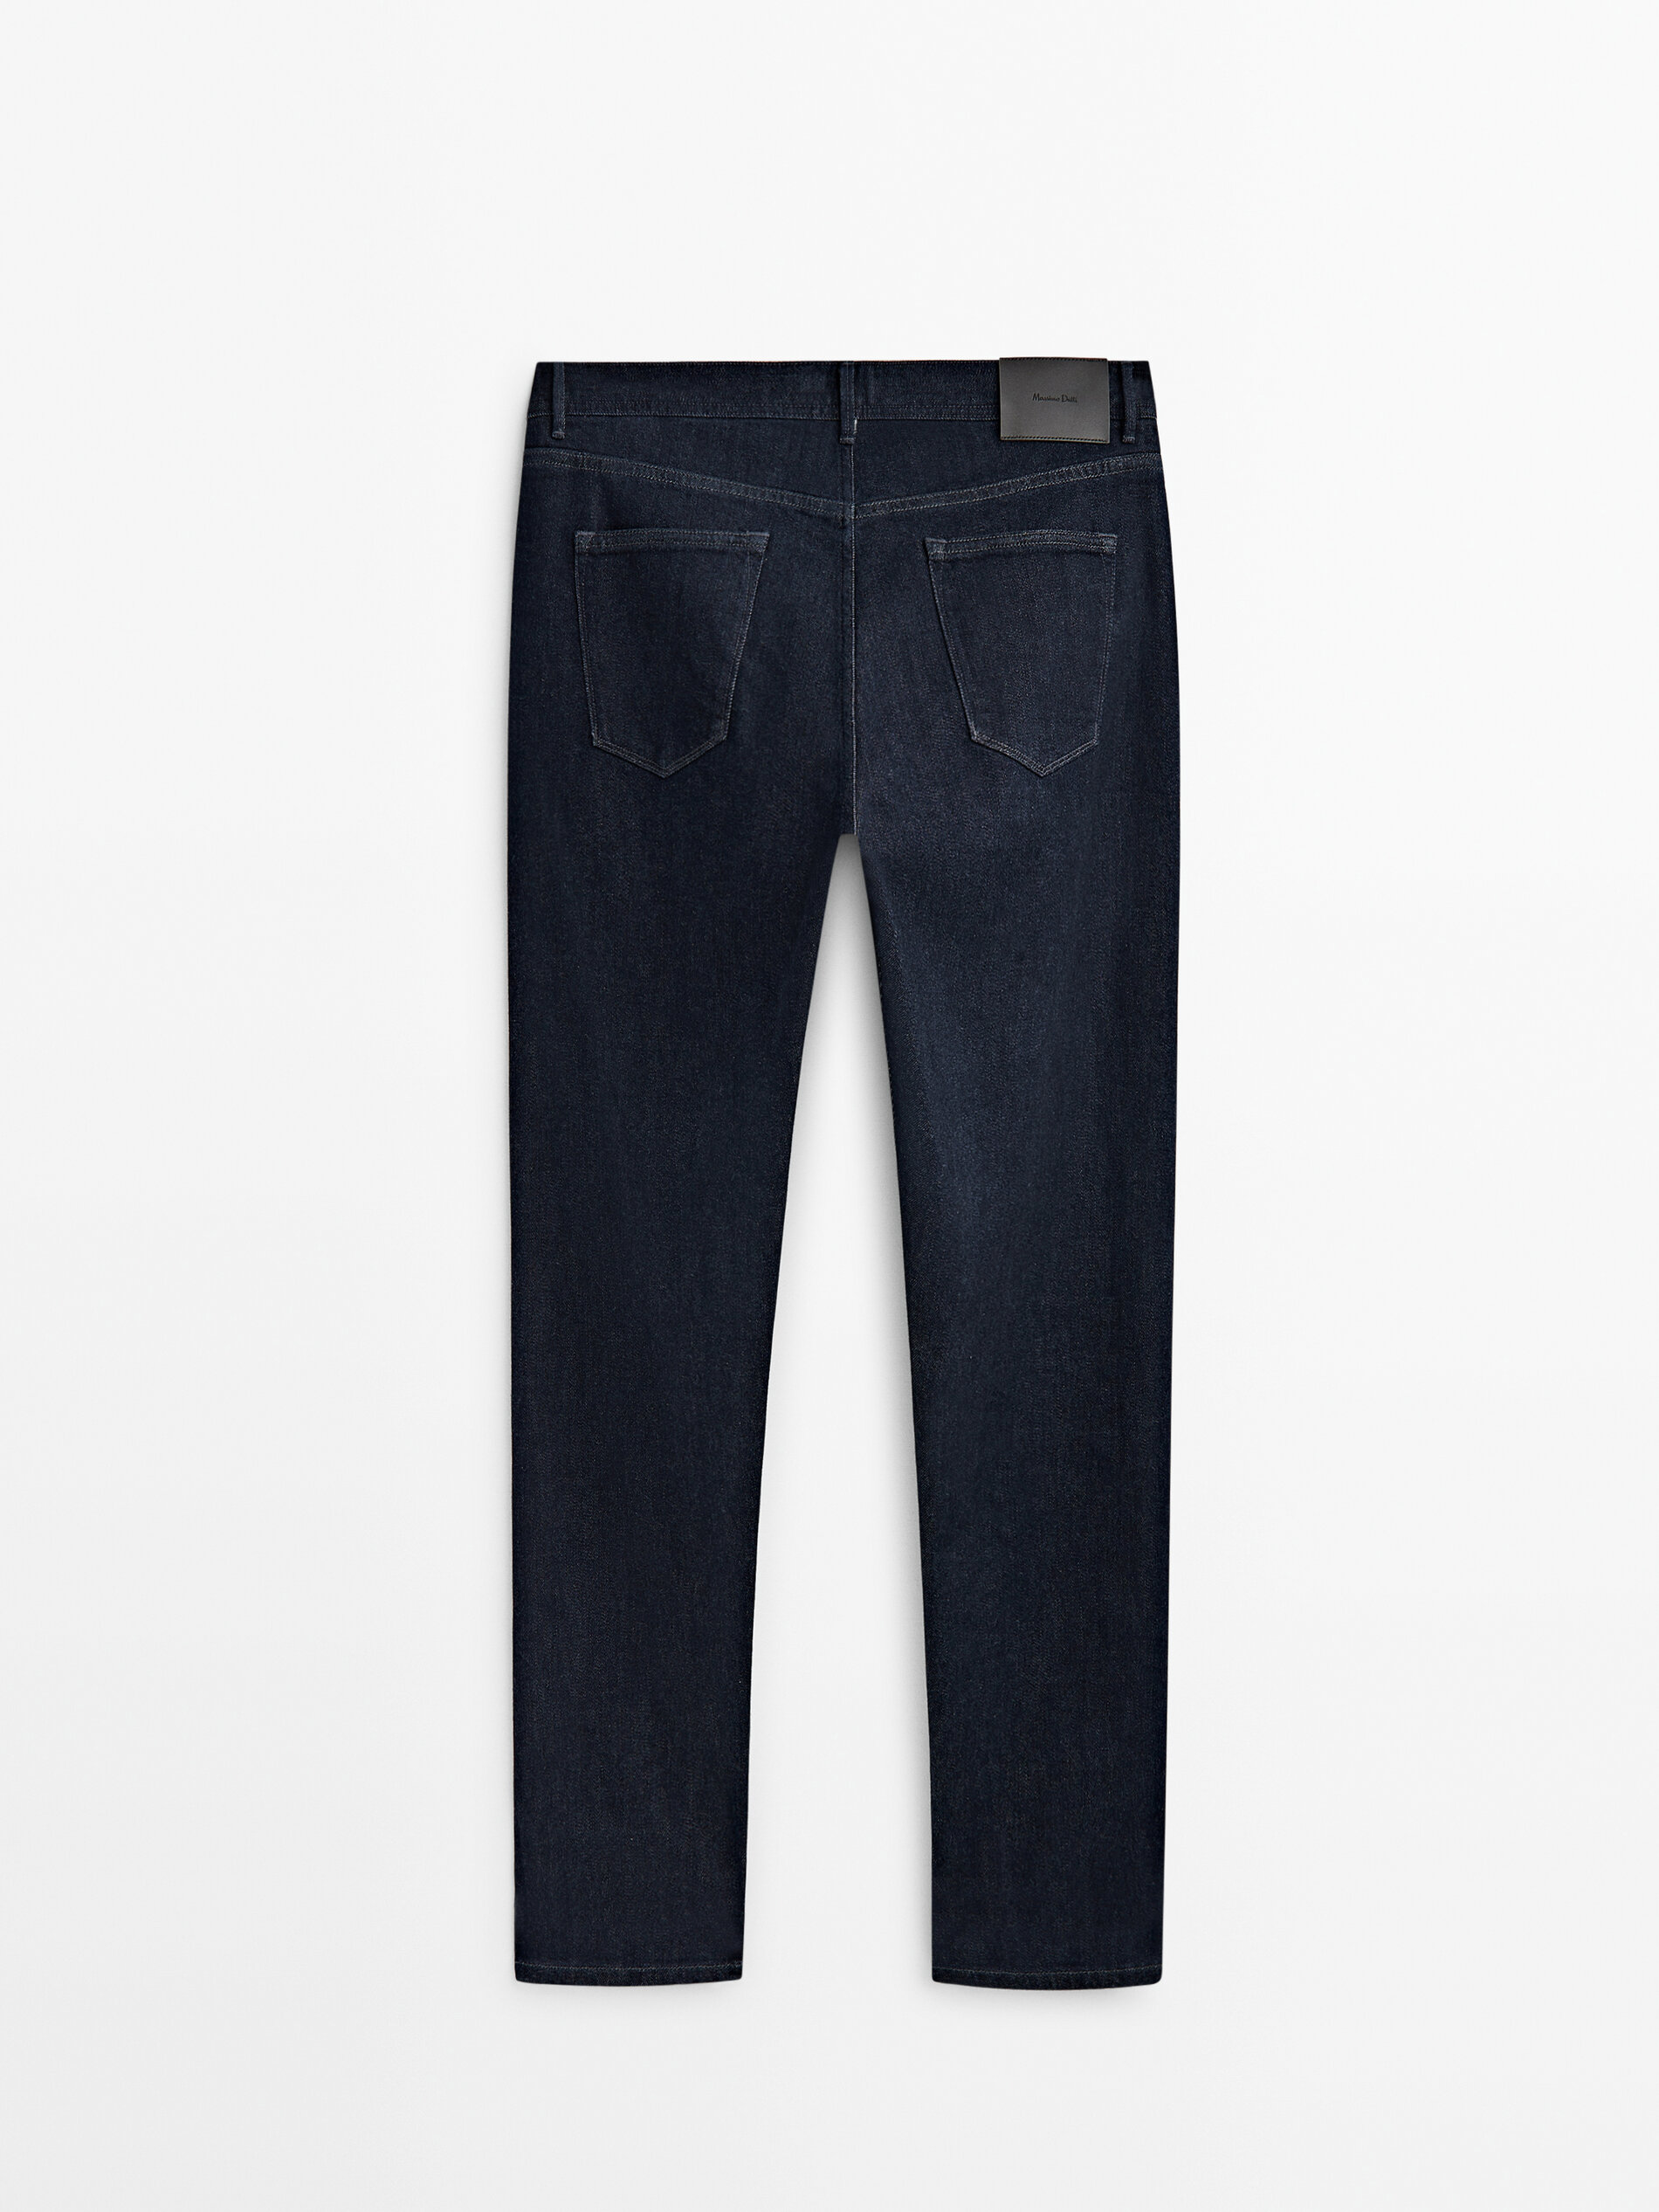 Jeans selvedge desencolado relaxed fit